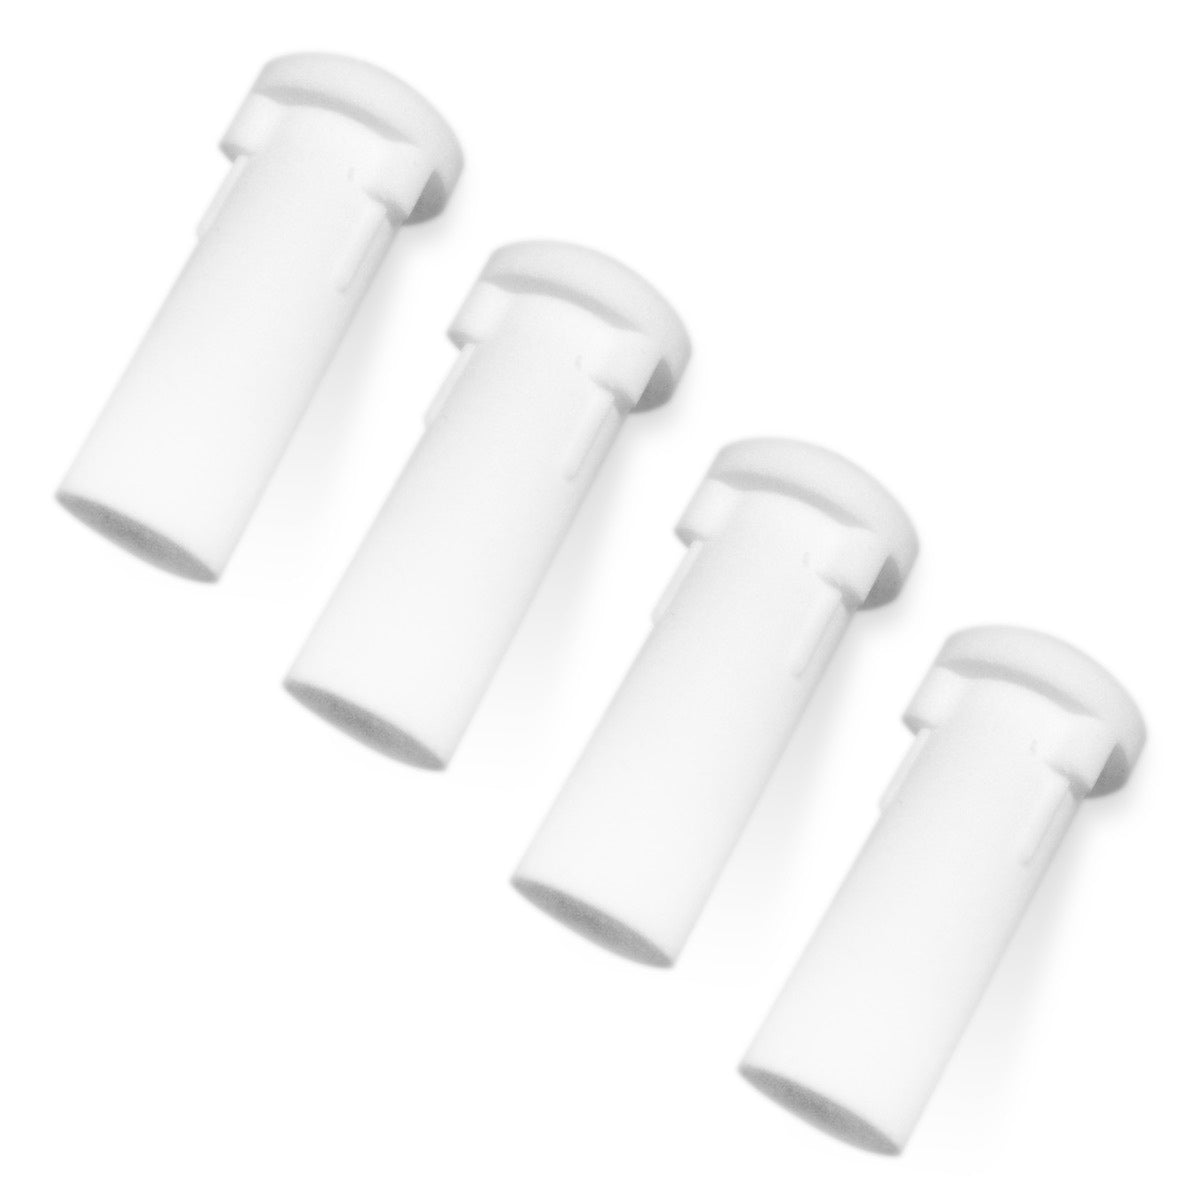 Air Filters for InnoSpire Elegance, Essence & Deluxe Nebulizer Compressors (4 Pack)